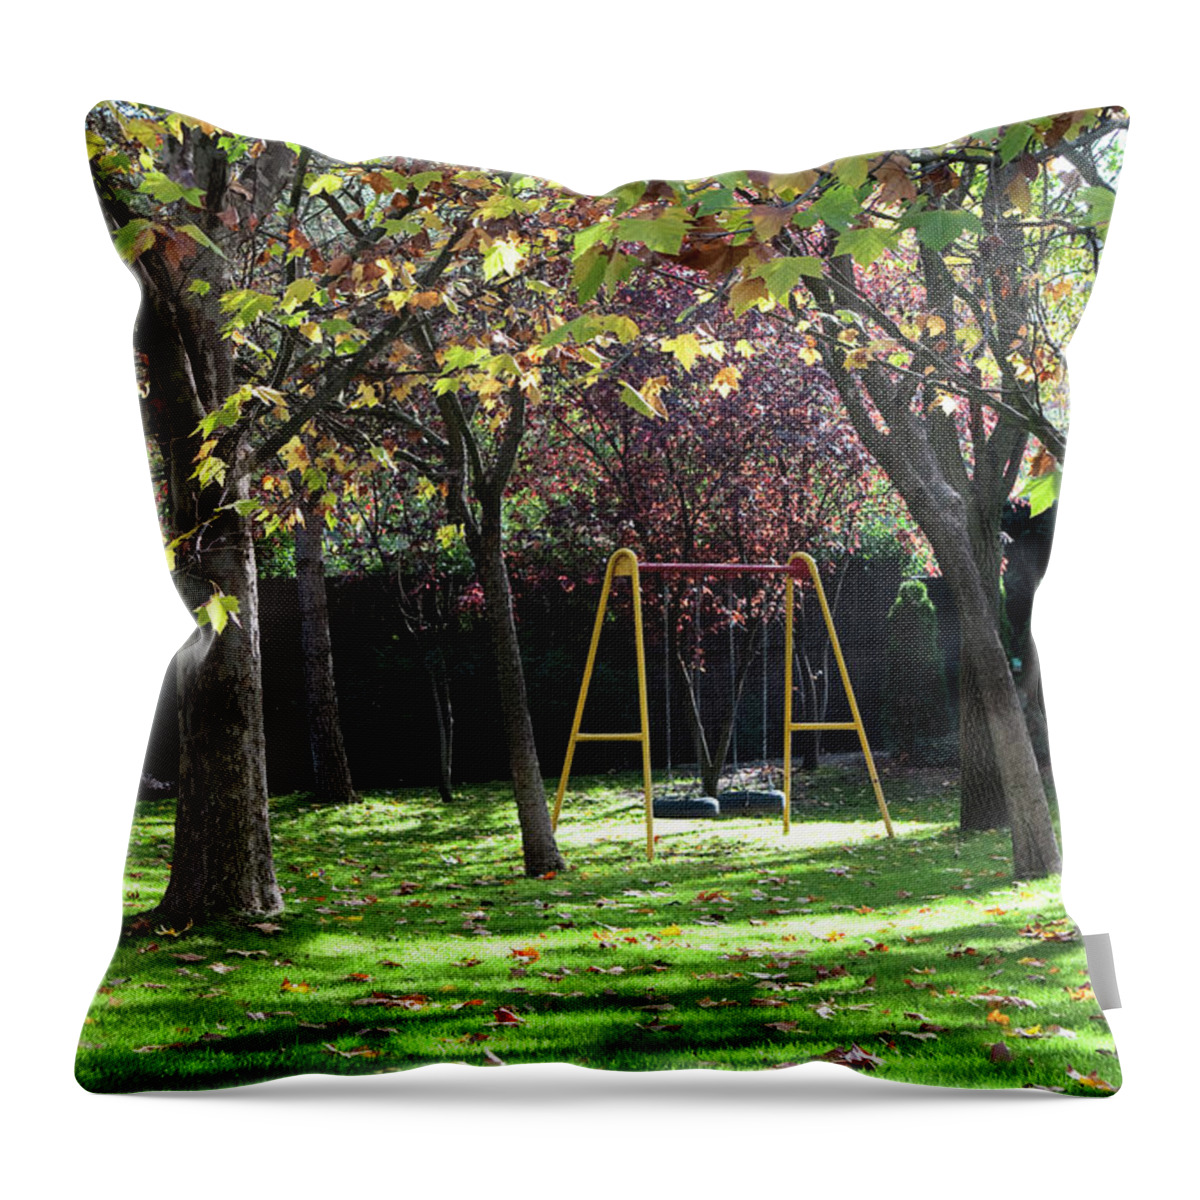 Madrid Throw Pillow featuring the photograph Yellow Swingset by Lorraine Devon Wilke